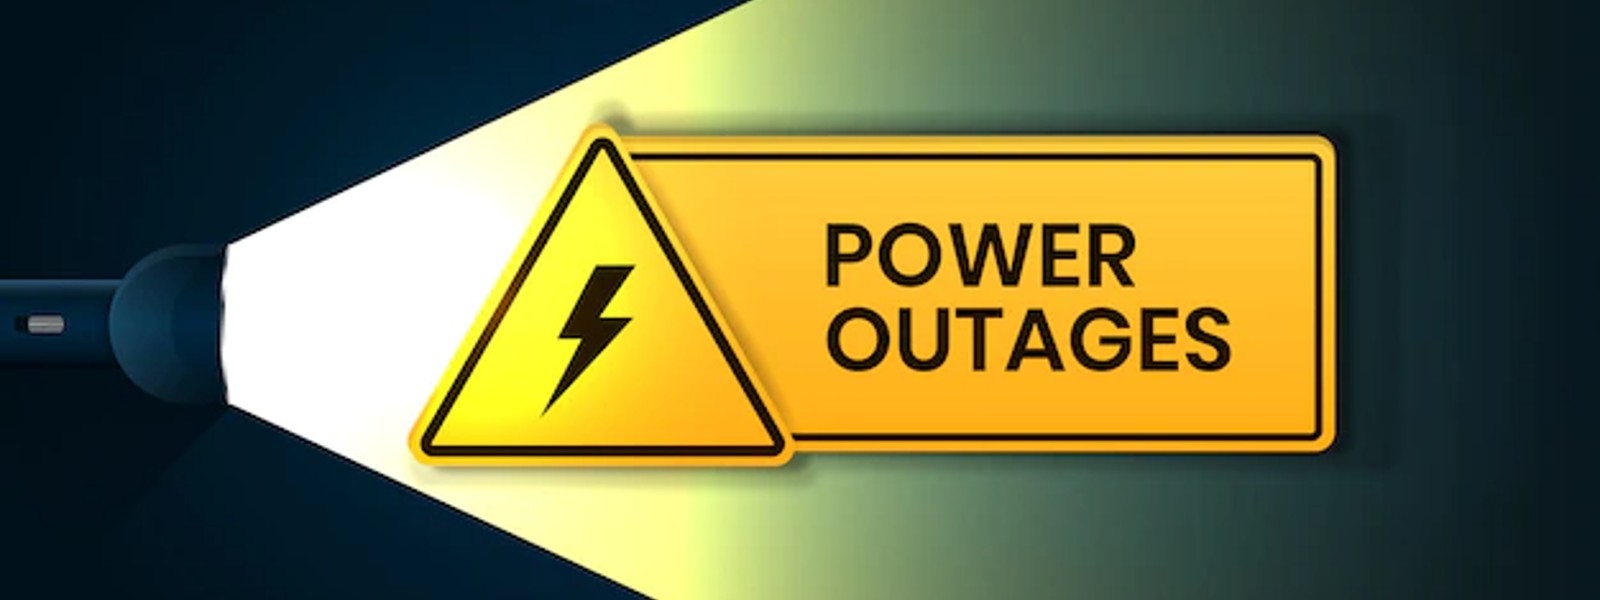 Power Cuts reduced to 2 hours – PUCSL